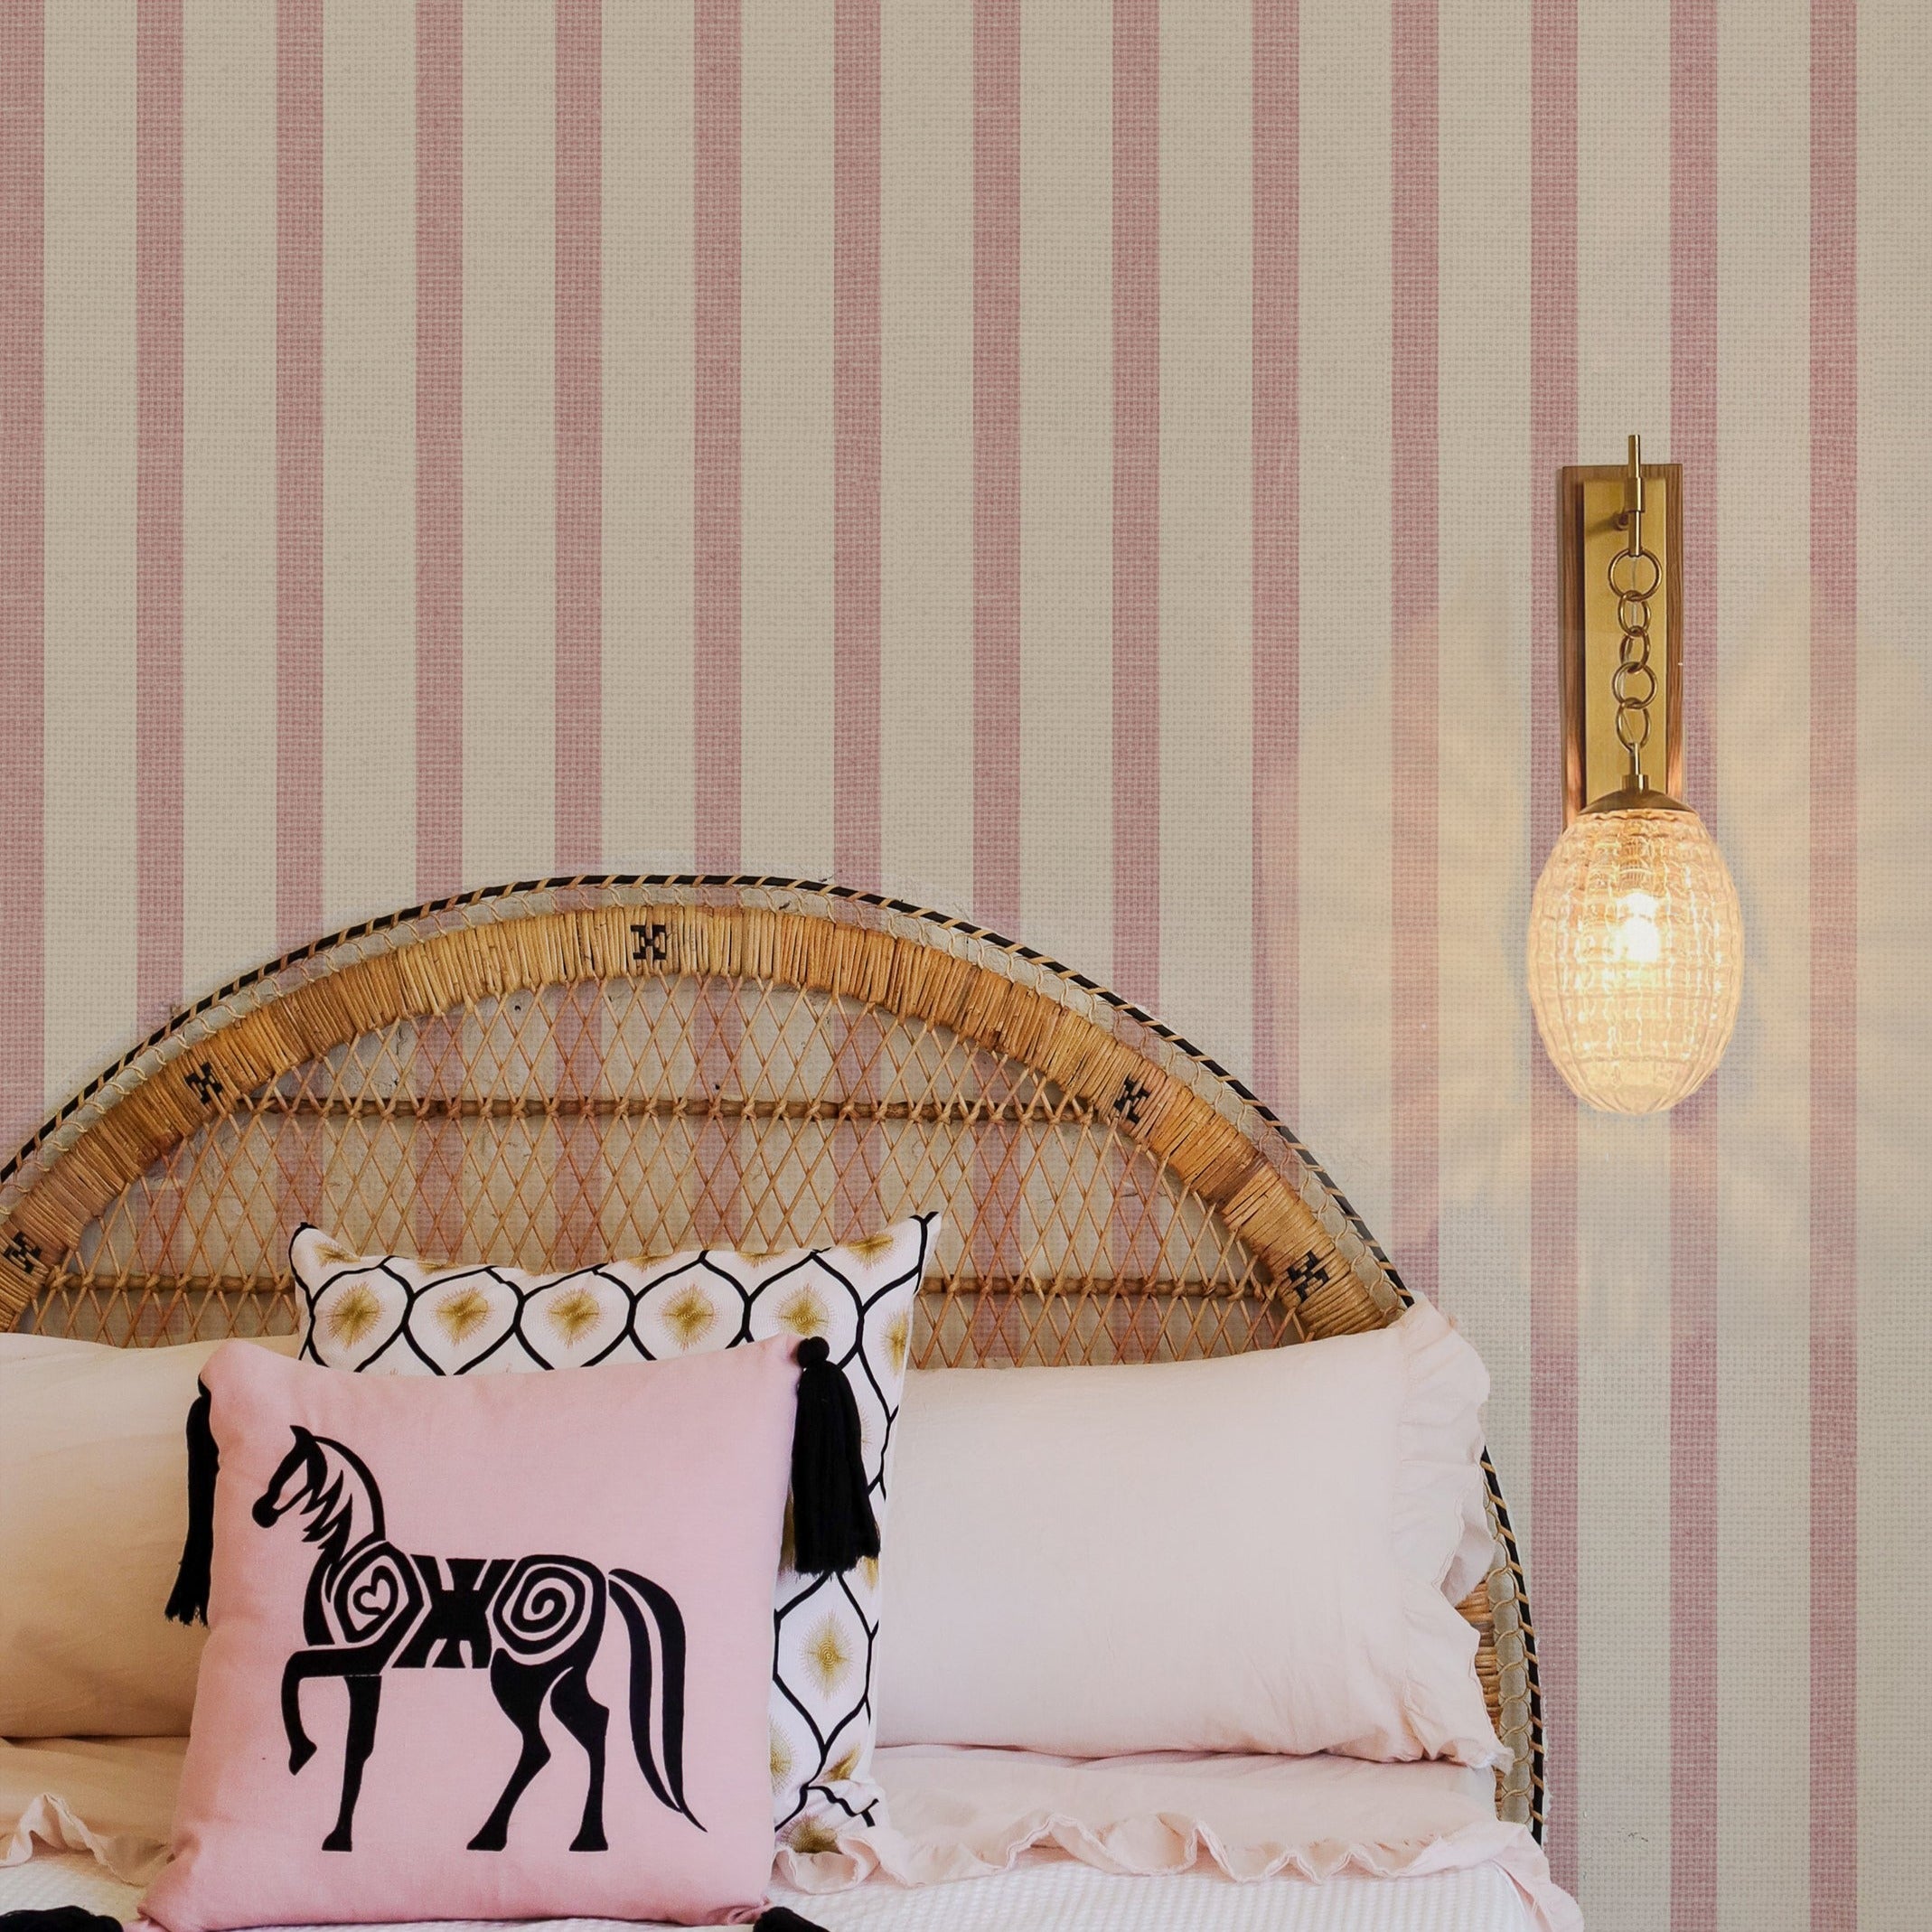 A serene bedroom setting featuring Pink Textured Striped Wallpaper with alternating light and dark pink stripes on a textured background. The room is styled with a rattan headboard, white bedding, and a decorative pink cushion with a horse motif, complemented by a modern wall-mounted light.